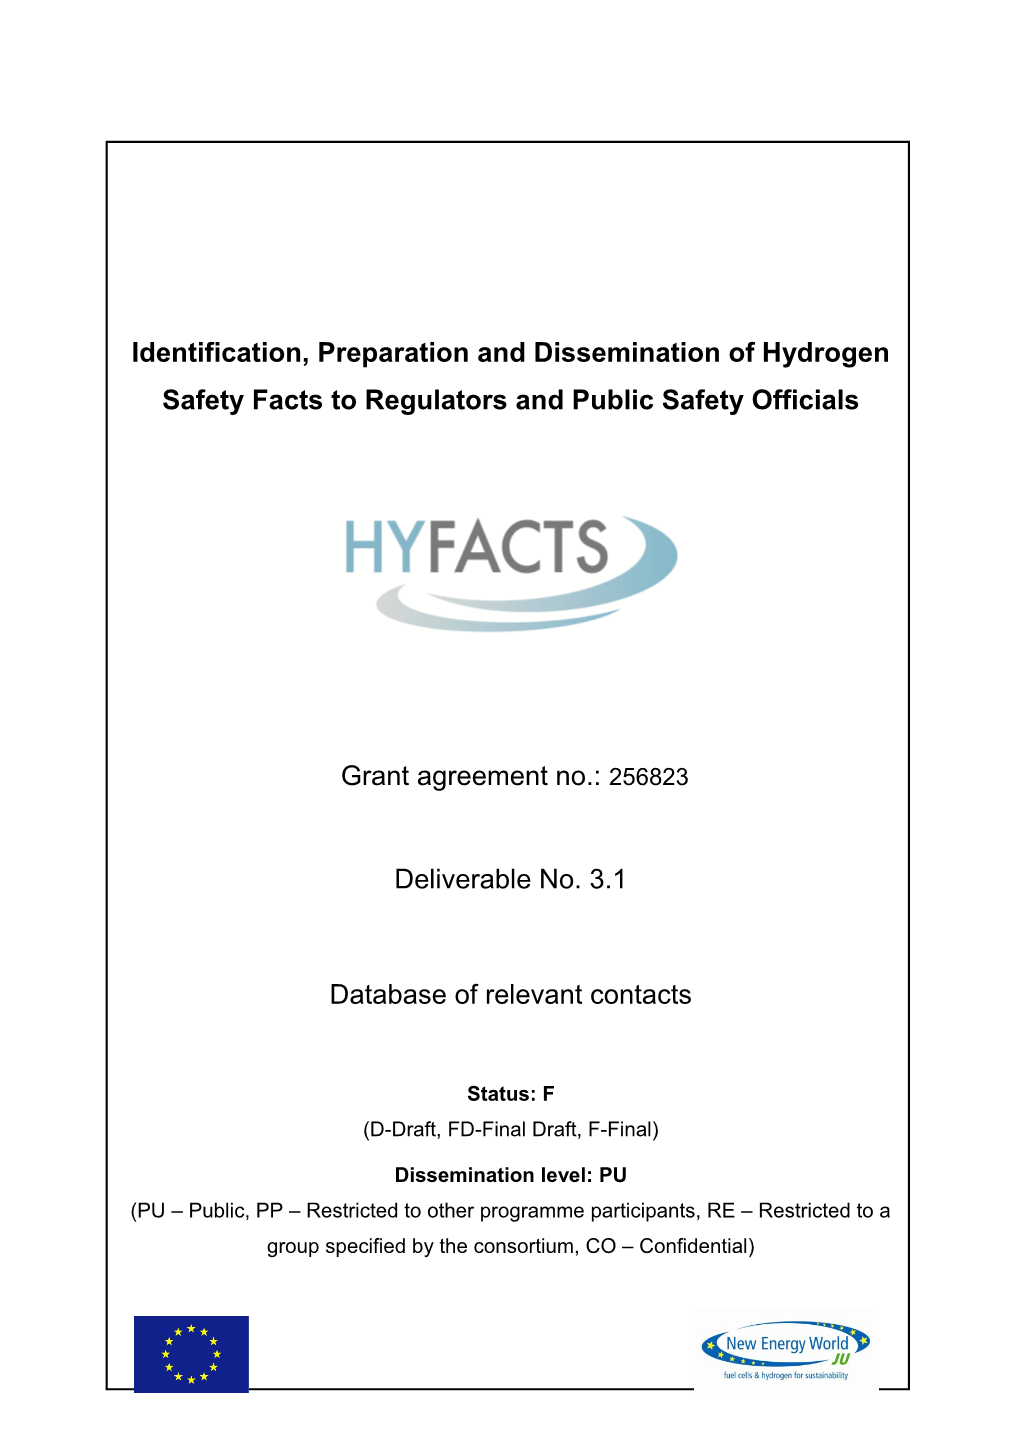 Identification, Preparation and Dissemination of Hydrogen Safety Facts to Regulators And